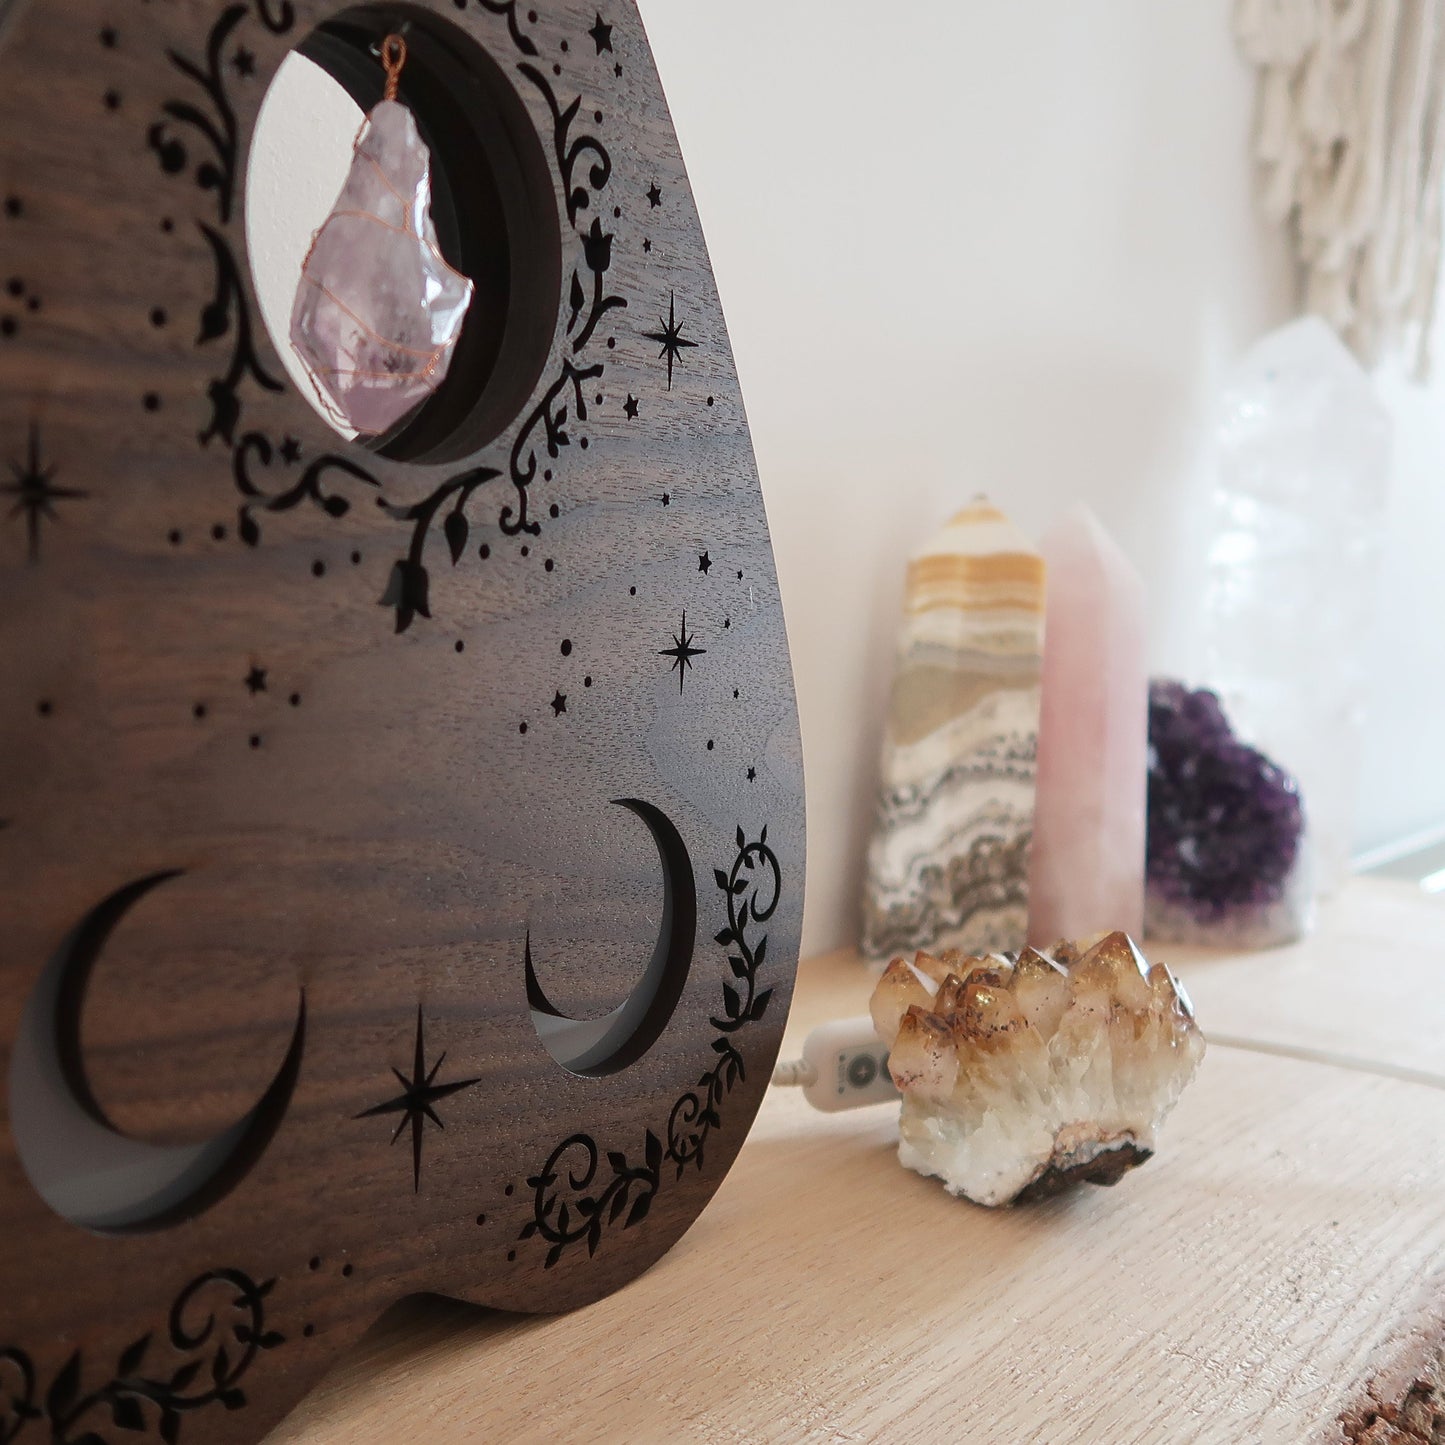 Planchette Table Lamp -Heart crystal lamp